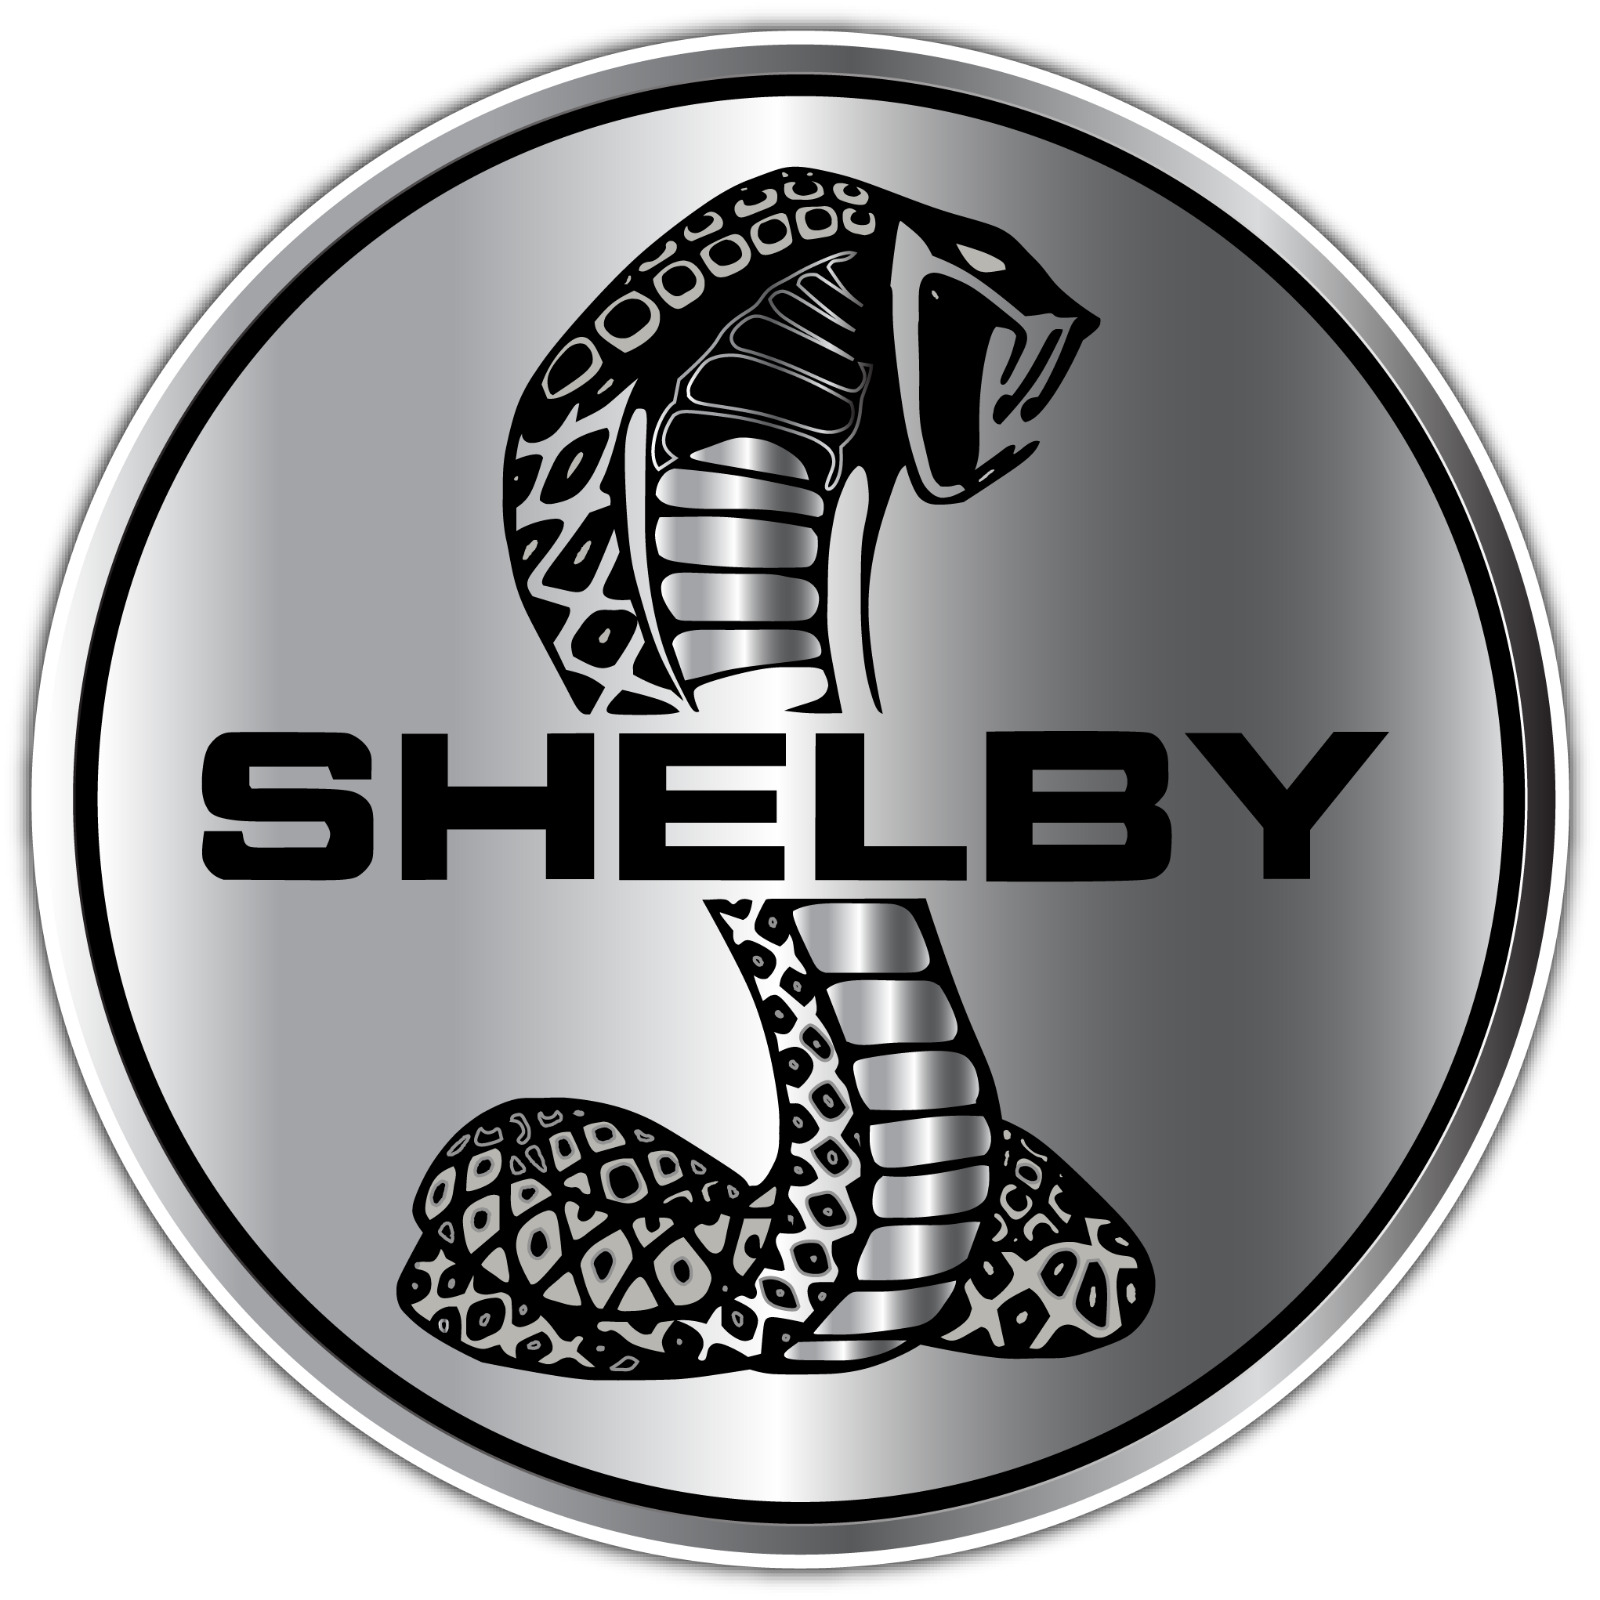 Cobra Shelby Ford Mustang GT Racing Moto Sports Vinyl Sticker Decal Black Silver